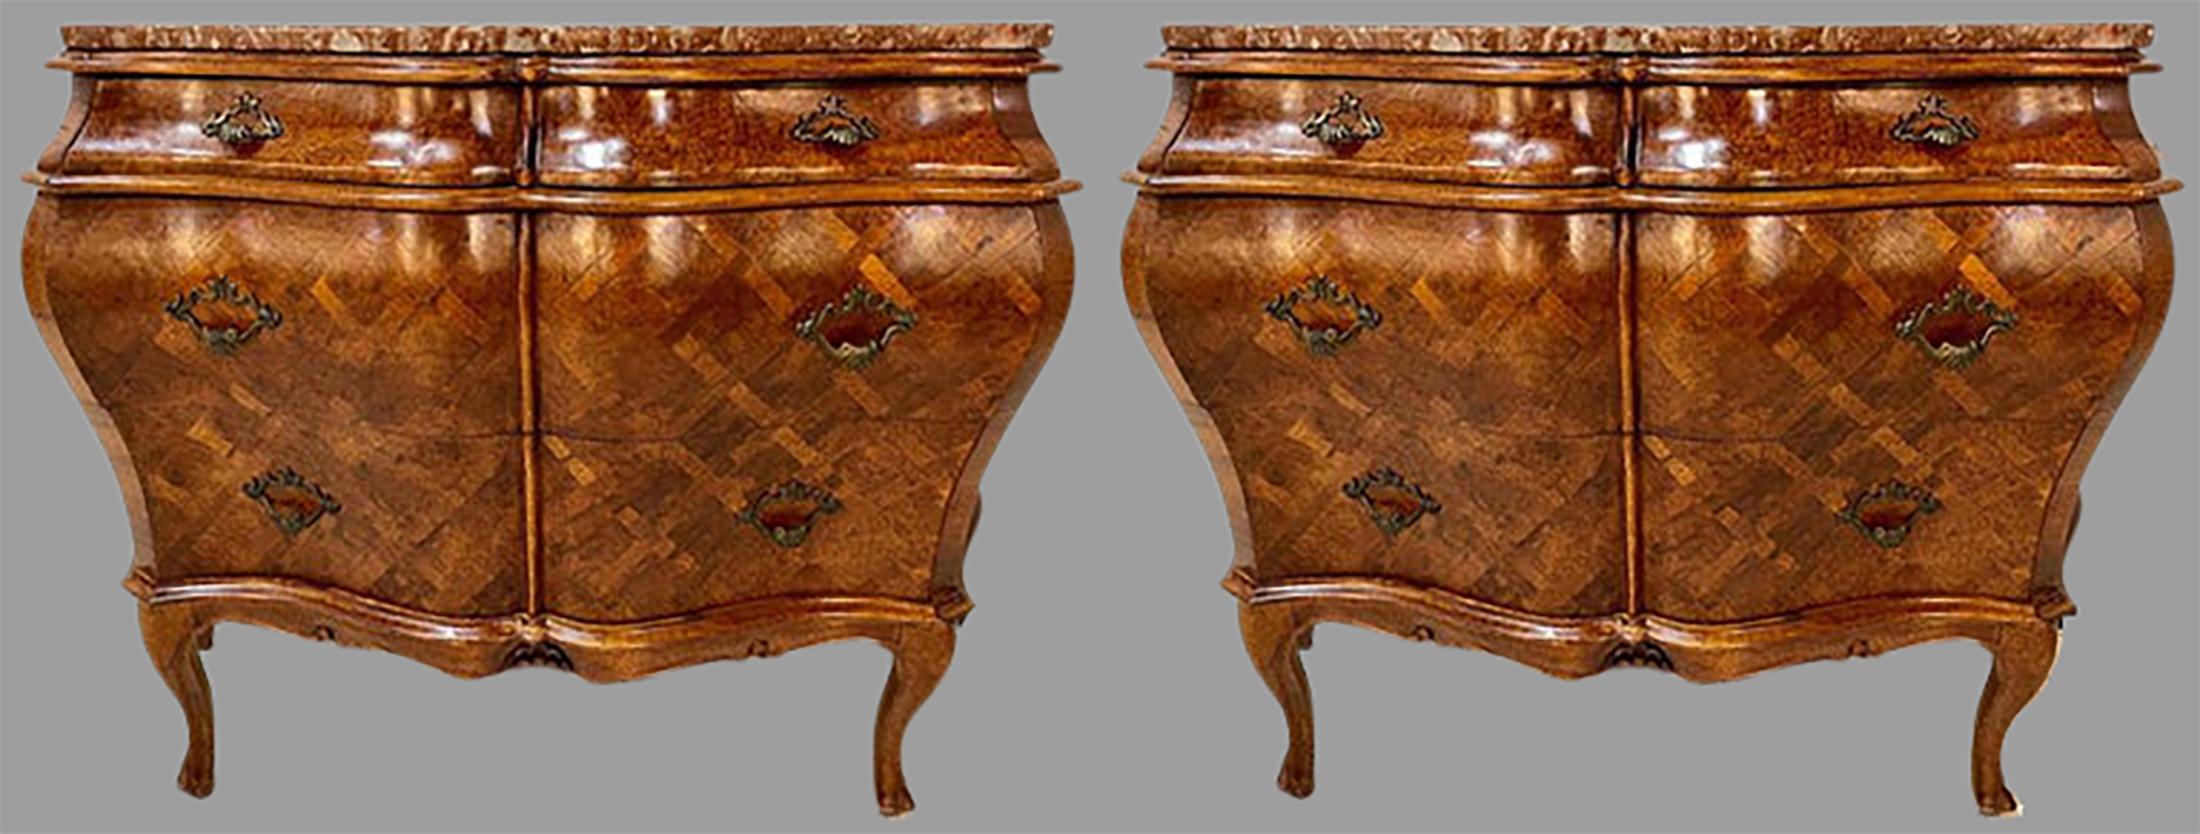 A pair of olive wood Bombay Italian commodes circa 1950, each having three drawers on a parquetry inlaid case. The pair with fine parquetry inlaid tops that have later custom marbles which can also be used. Graduating drawers.
PhX.